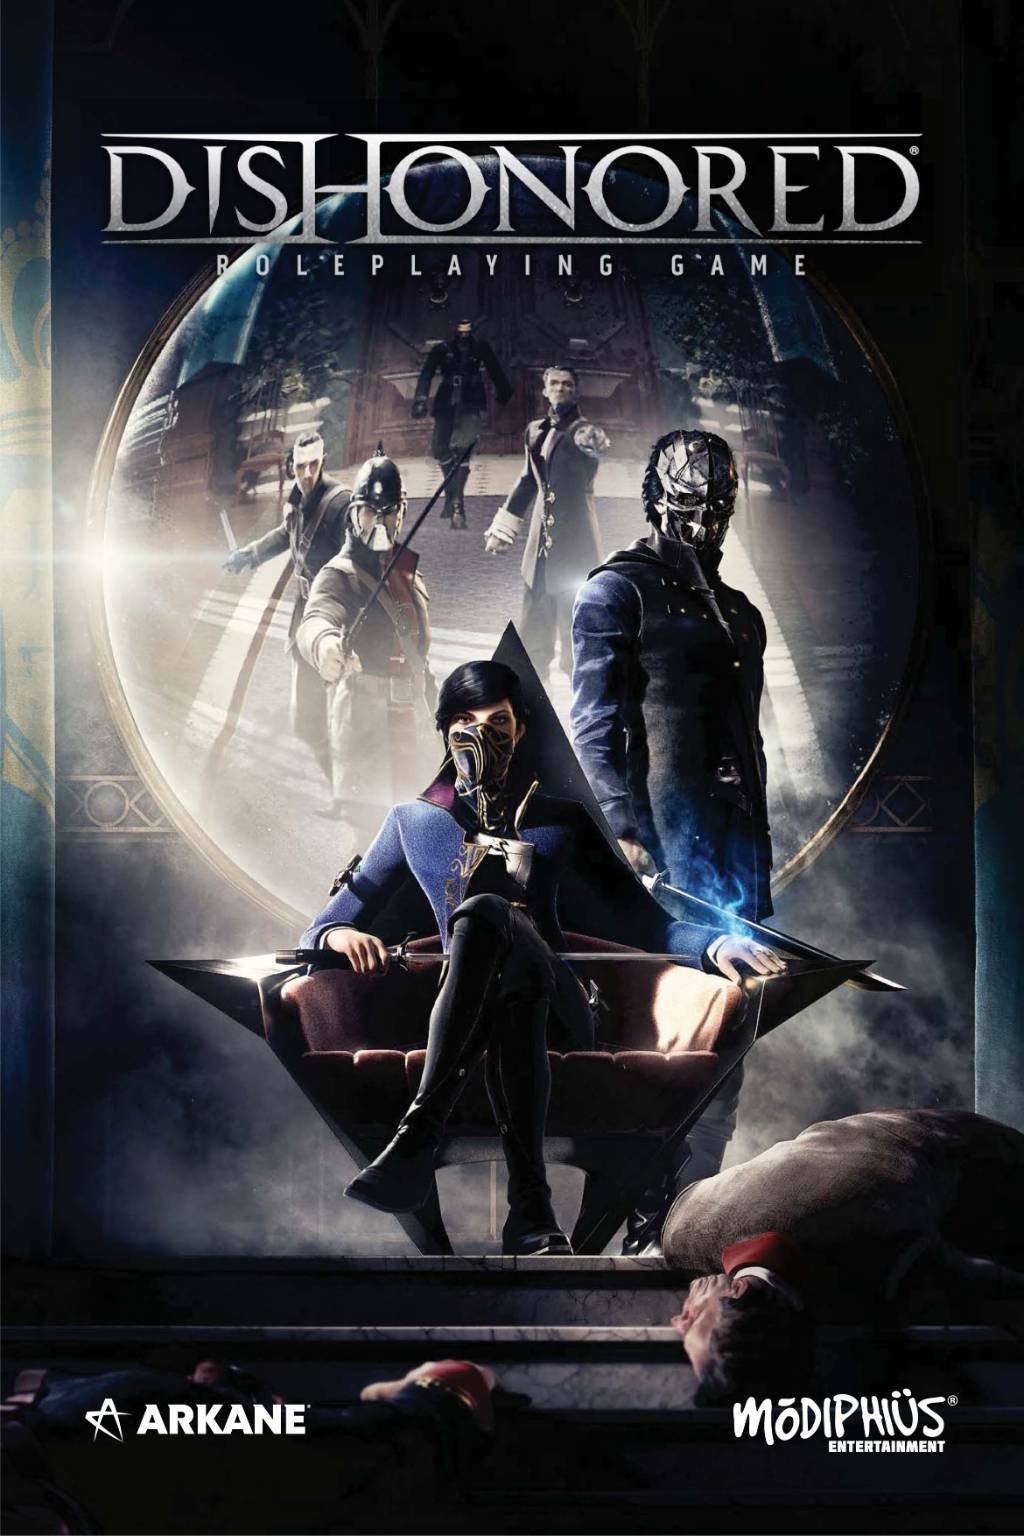 Immagine di Dishonored Roleplaying Game, la recensione